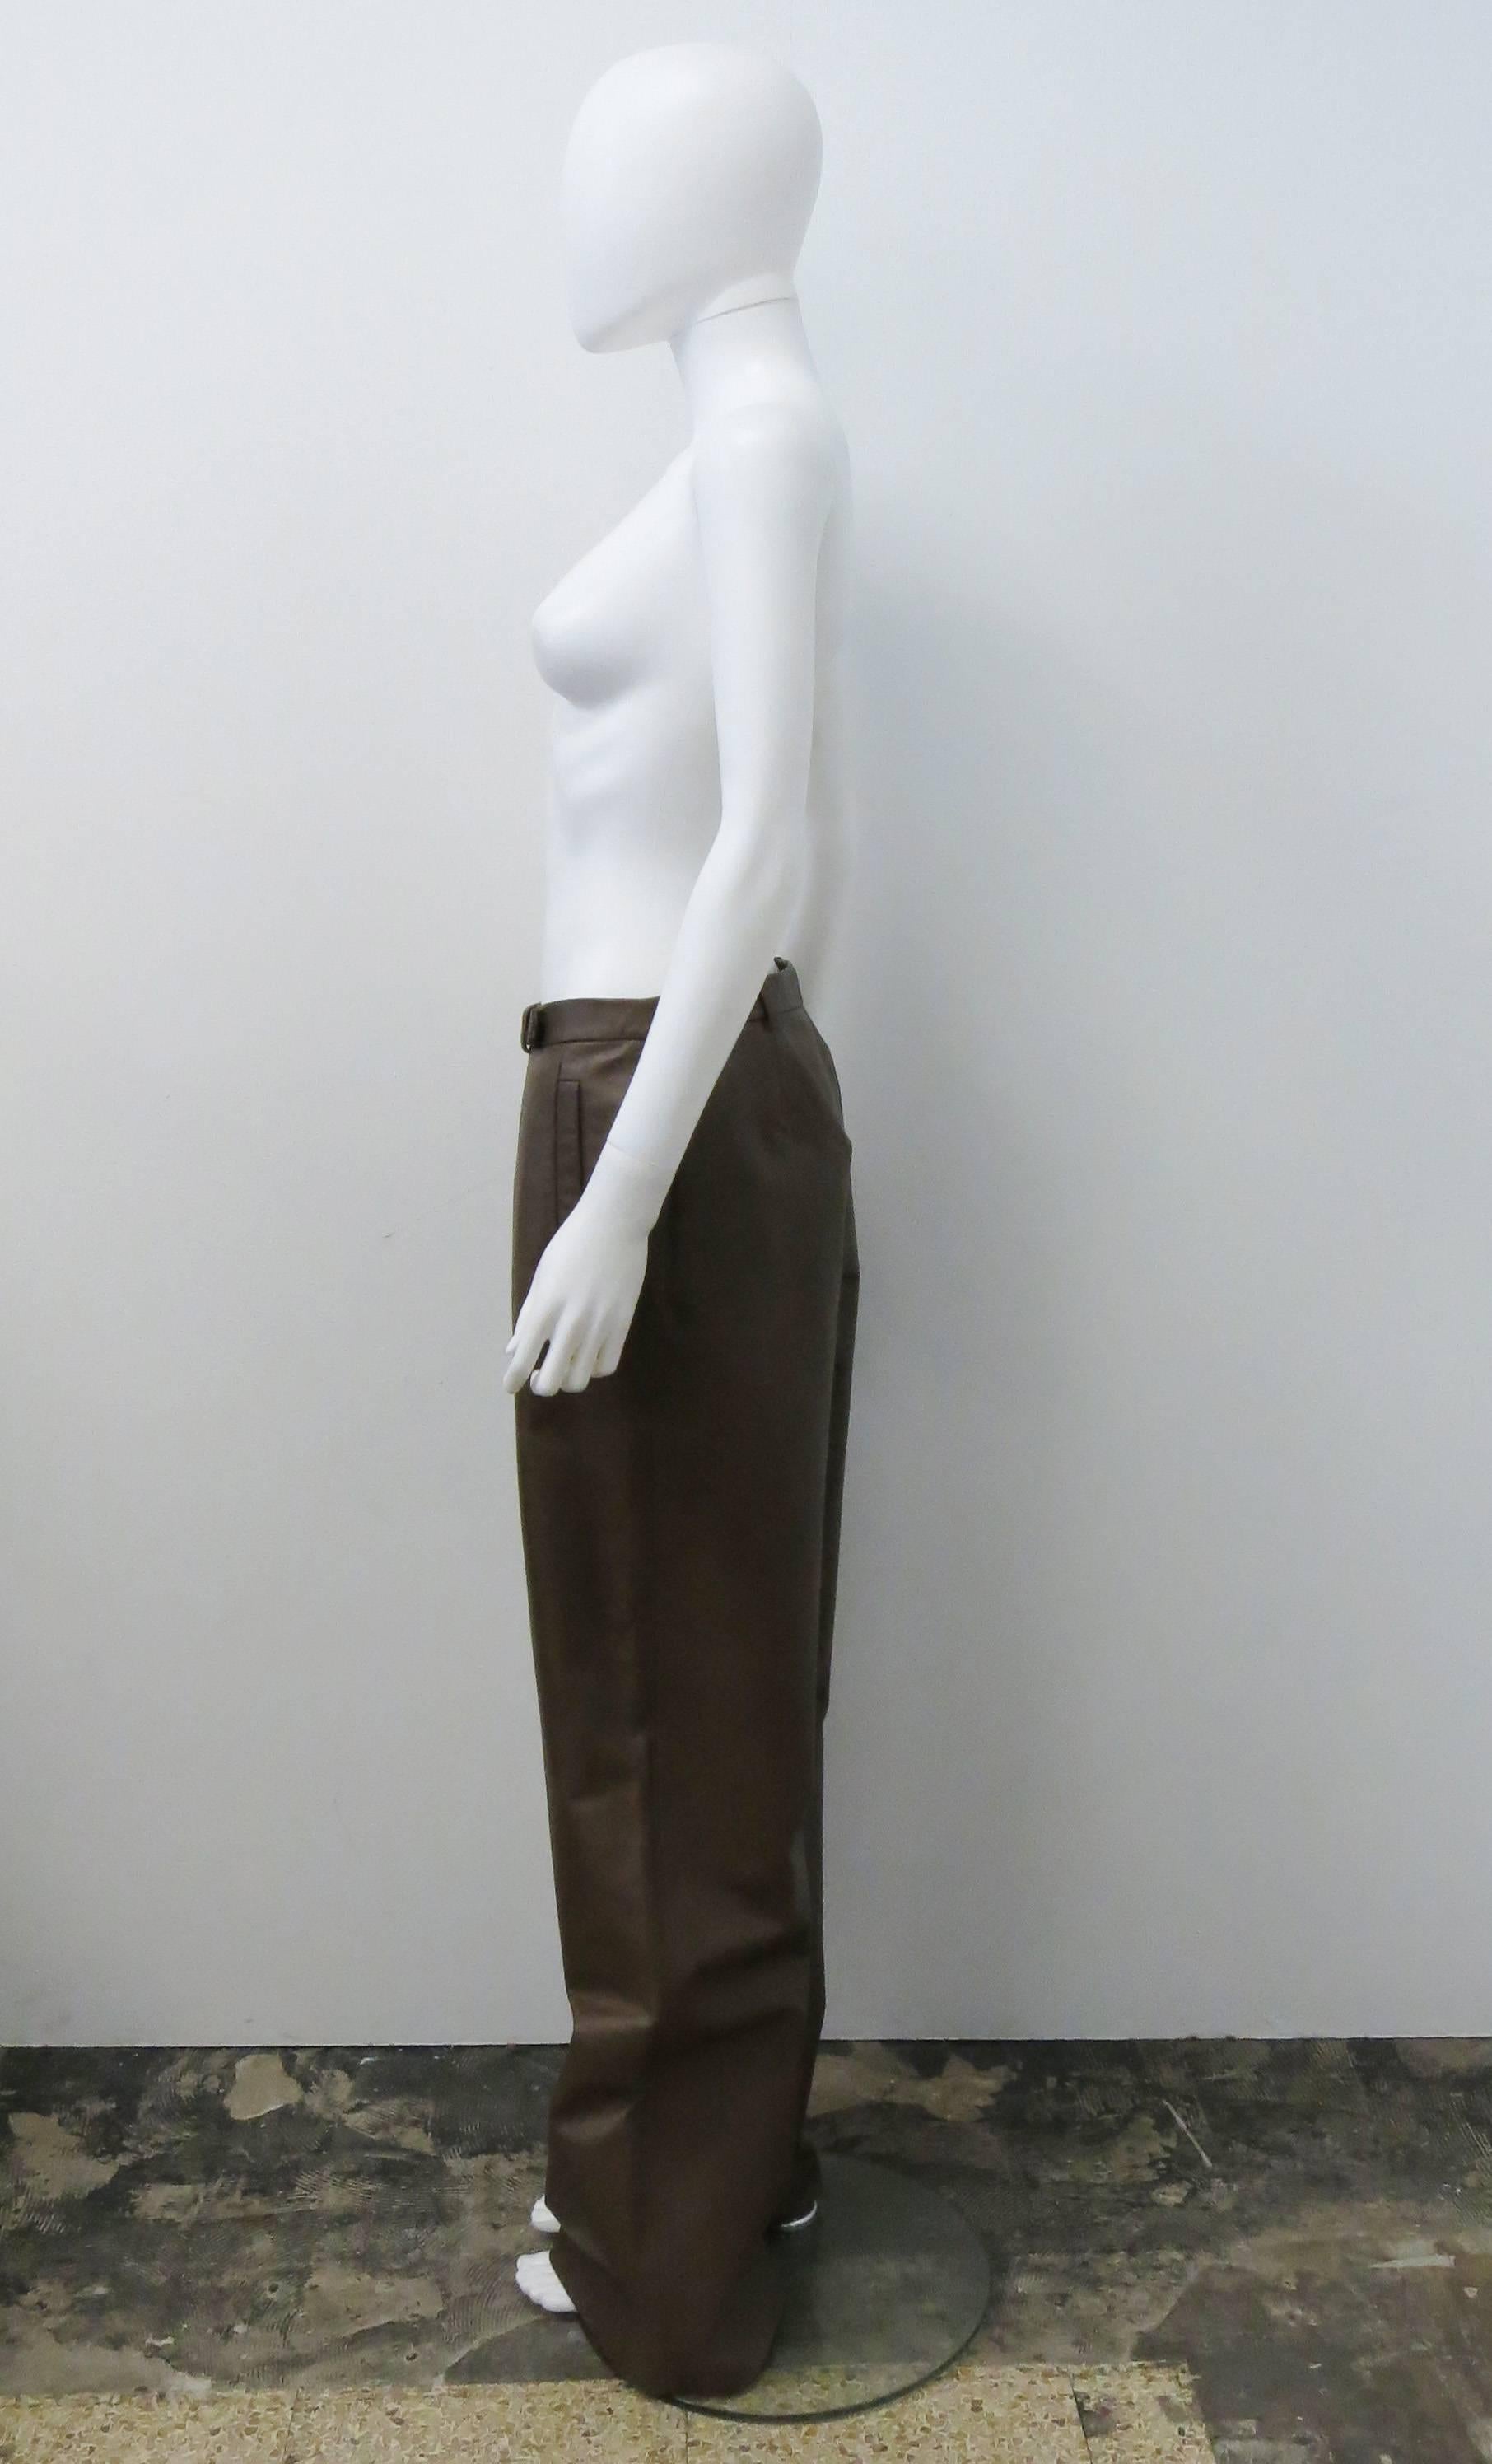 A pair of 1990’s Jil Sander Tan leather trousers. The trousers are made of 100% leather with a luxurious silk lining. They have a wide-leg and low-rise cut and are marked as an Italian size 42 which translates to a UK 10 (please see measurements for